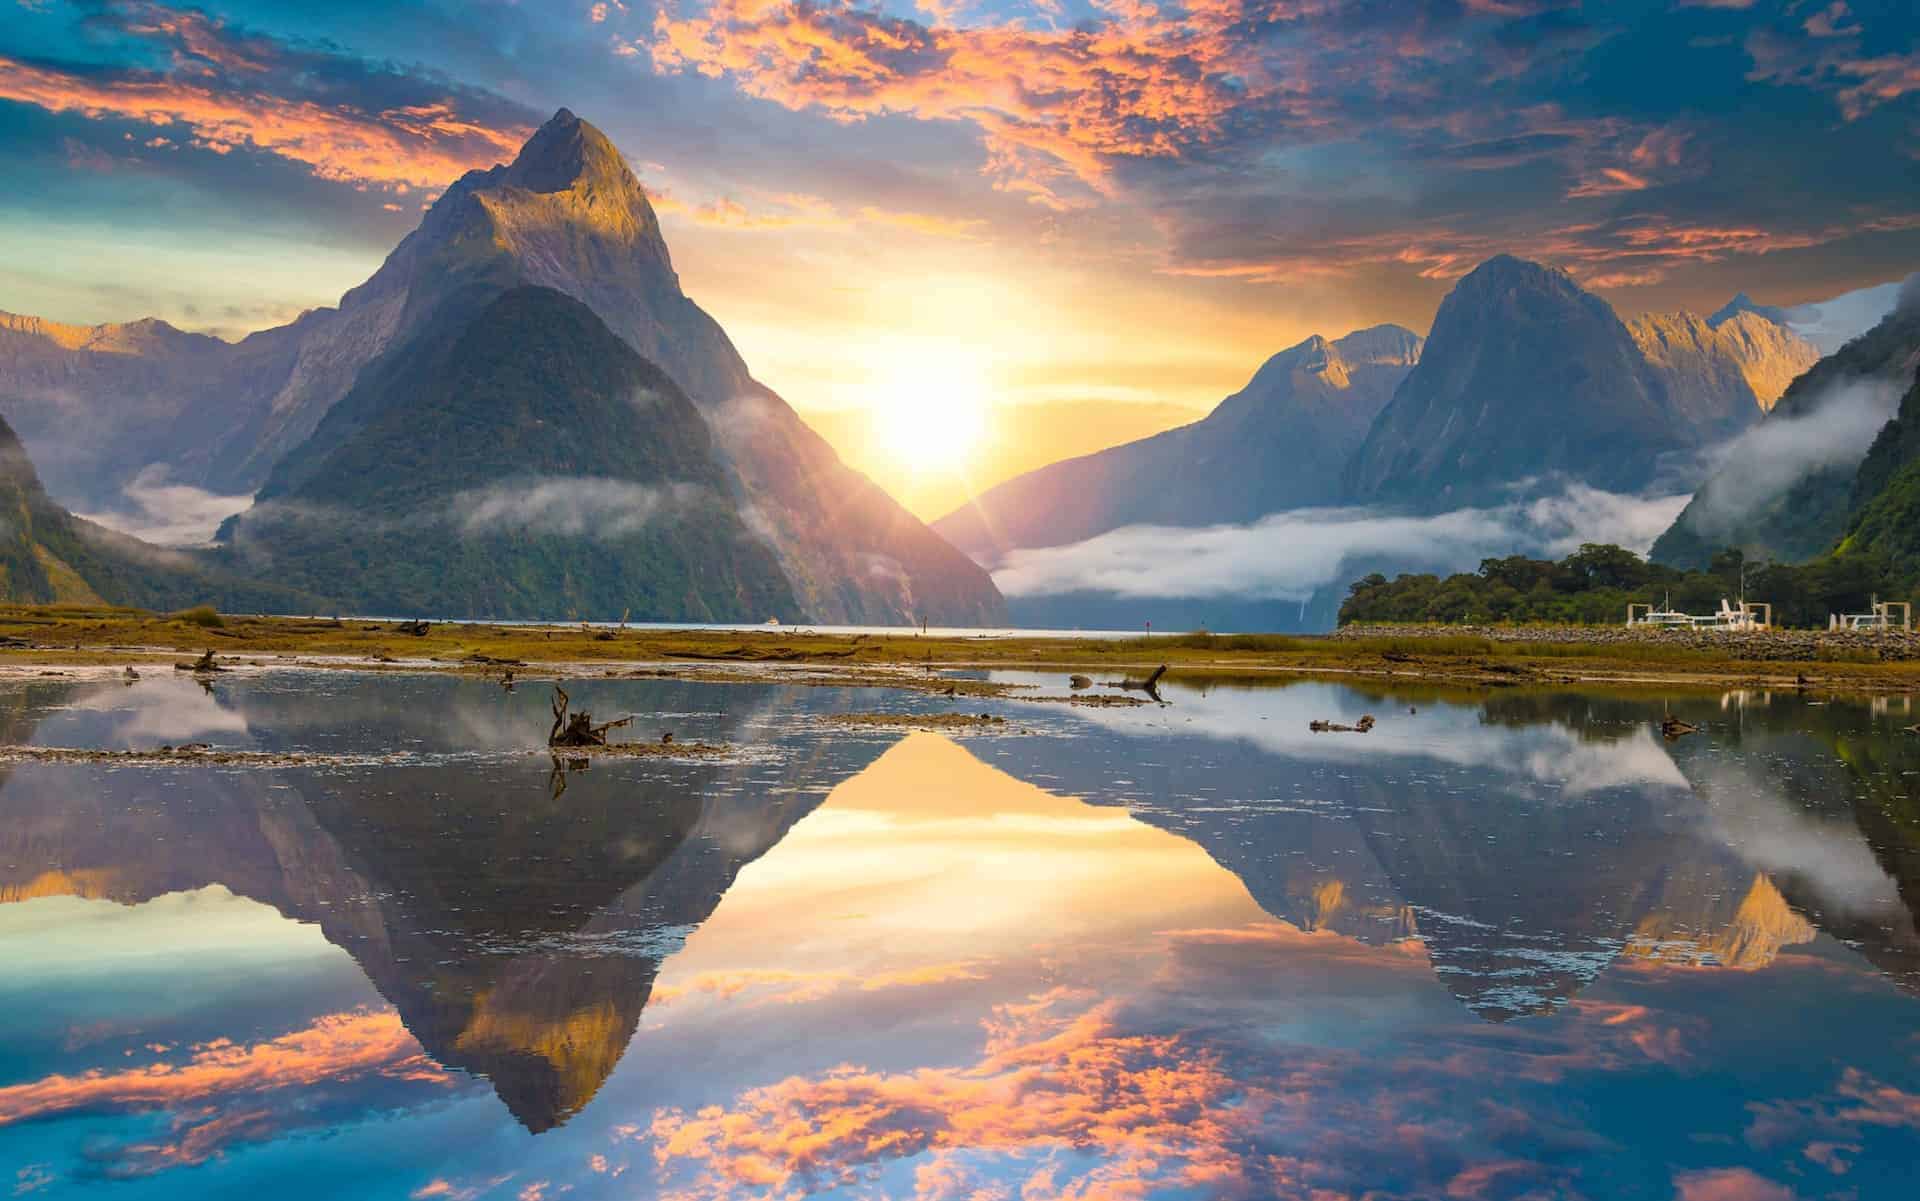 New Zealand's most spectacular natural attraction, Milford Sound can be enjoyed on an optional excursion